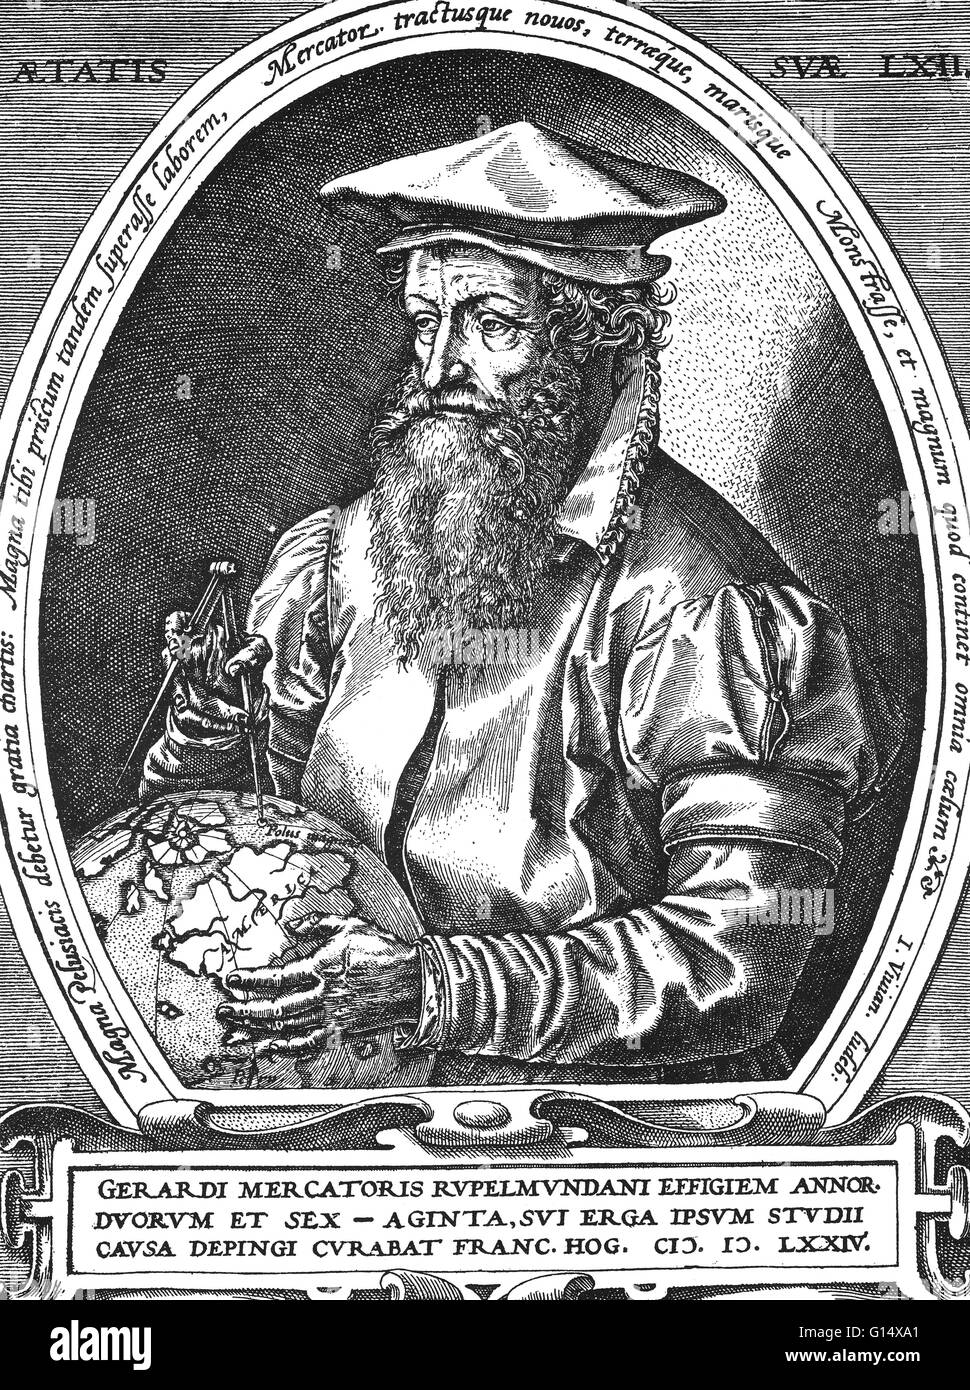 Gerardus Mercator (March 5, 1512 - December 2,1594) was a Flemish cartographer. He was born Gerard de gemor or de Cremer (Mercator is the Latinized form of his name). Mercator's map-making began when he produced a map of Palestine in 1537. In 1538 he prod Stock Photo